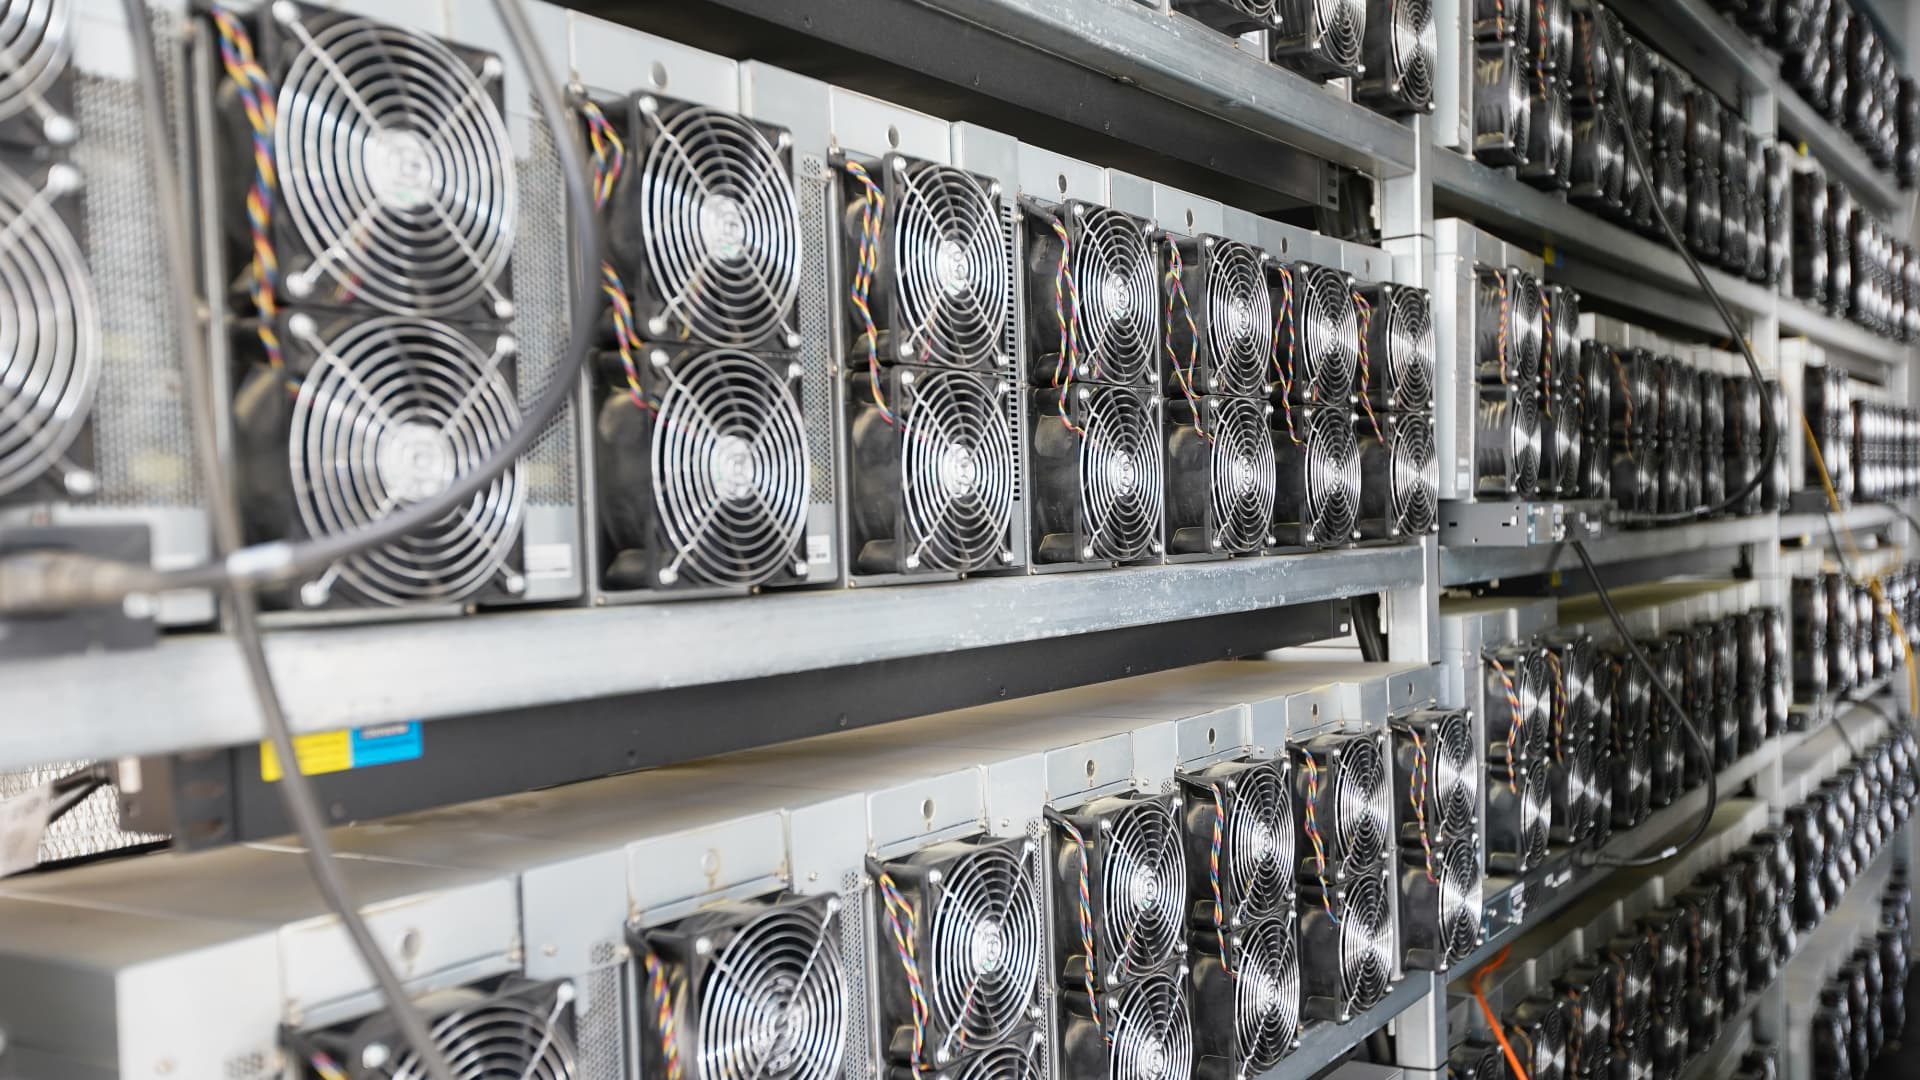 Bitcoin mining stocks rise as network congestion raises hopes of higher fees ahead